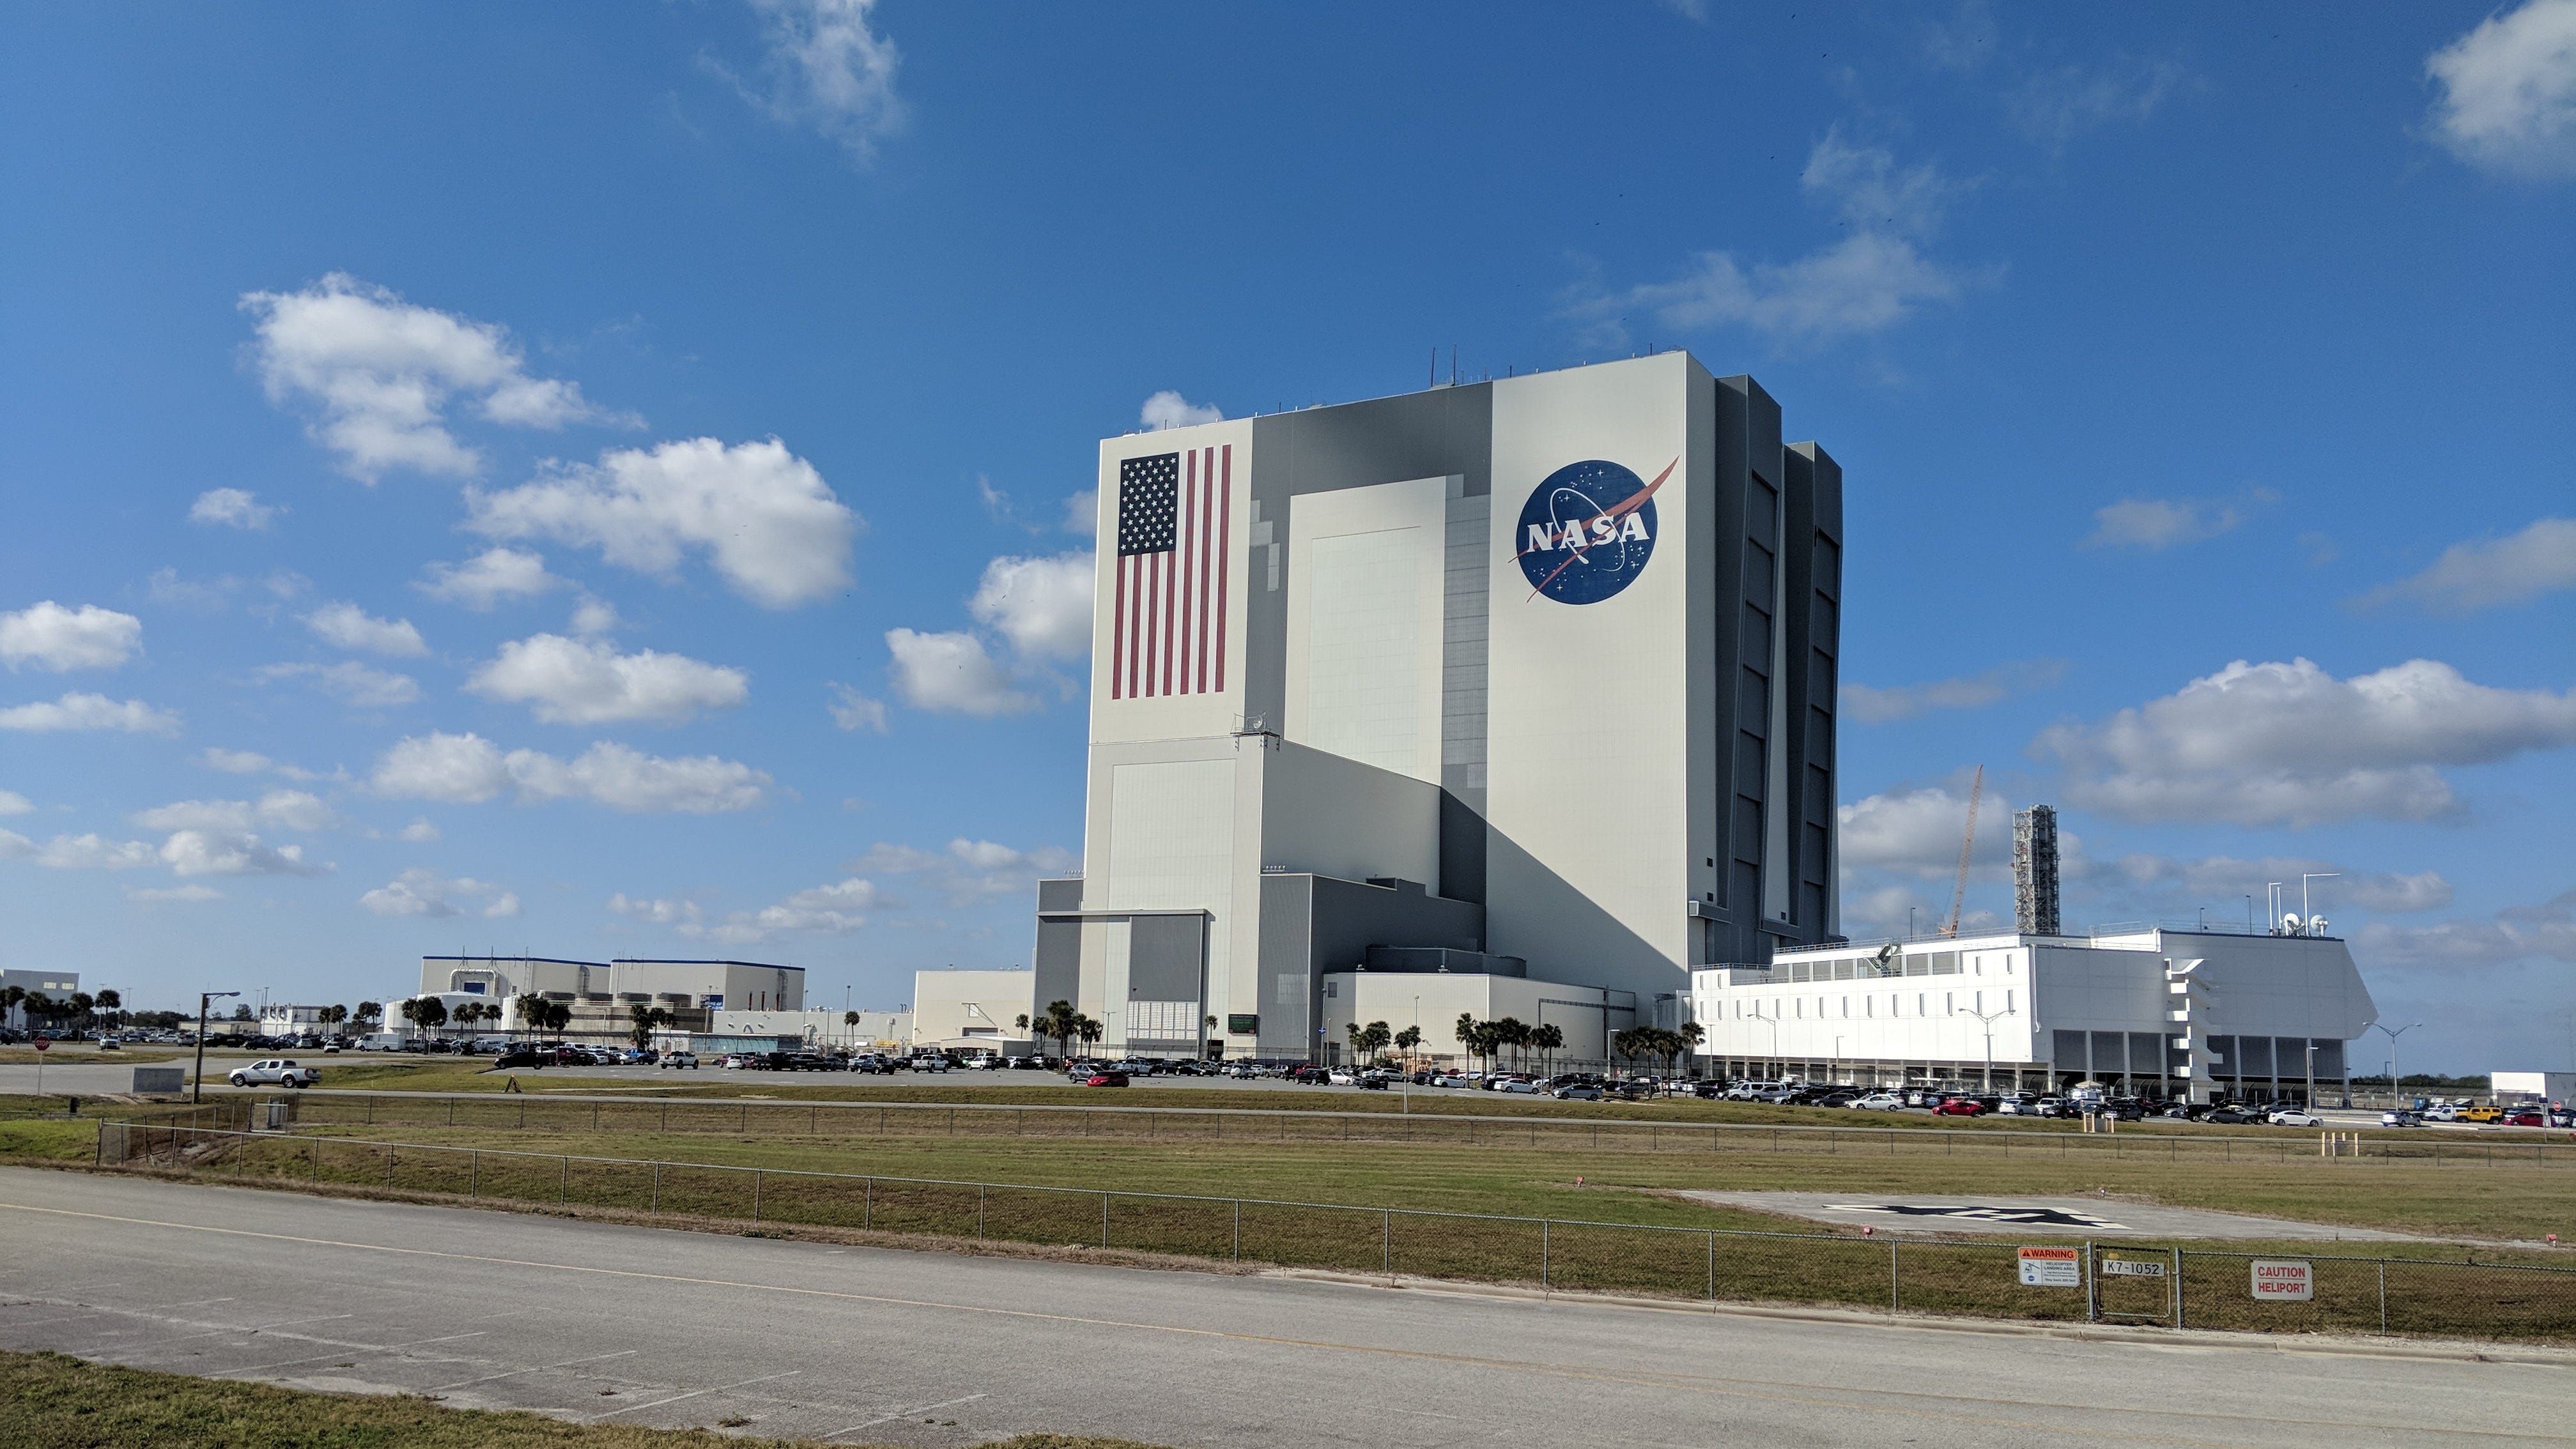 Raymond Soto: My Experience Touring The Kennedy Space Center